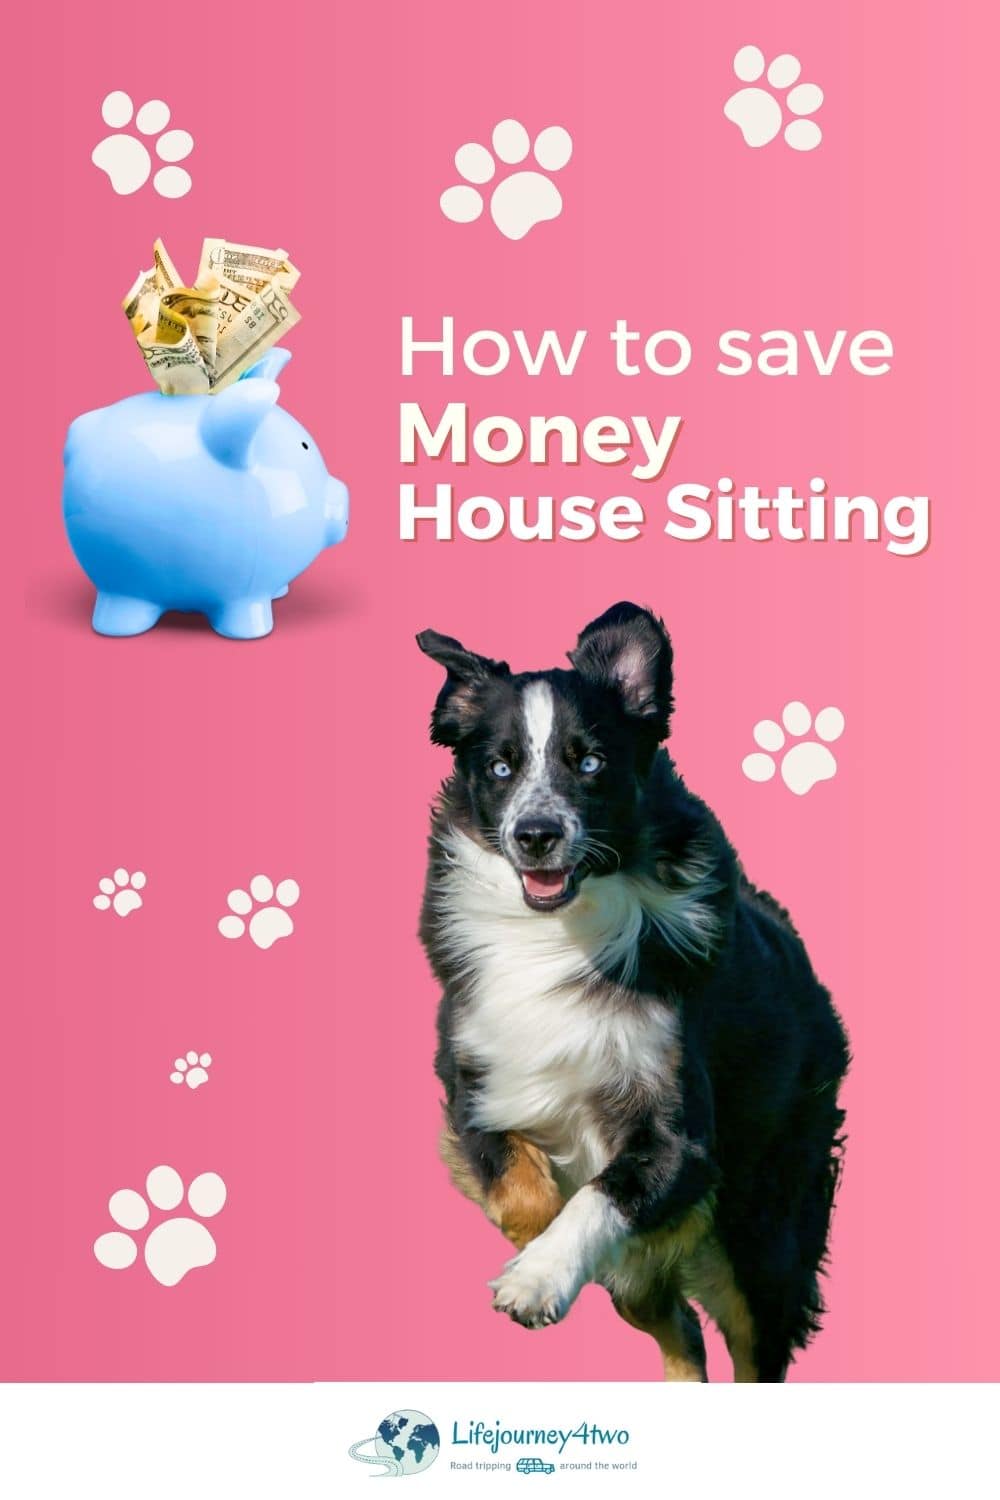 How to save money house sitting Pinterest pin